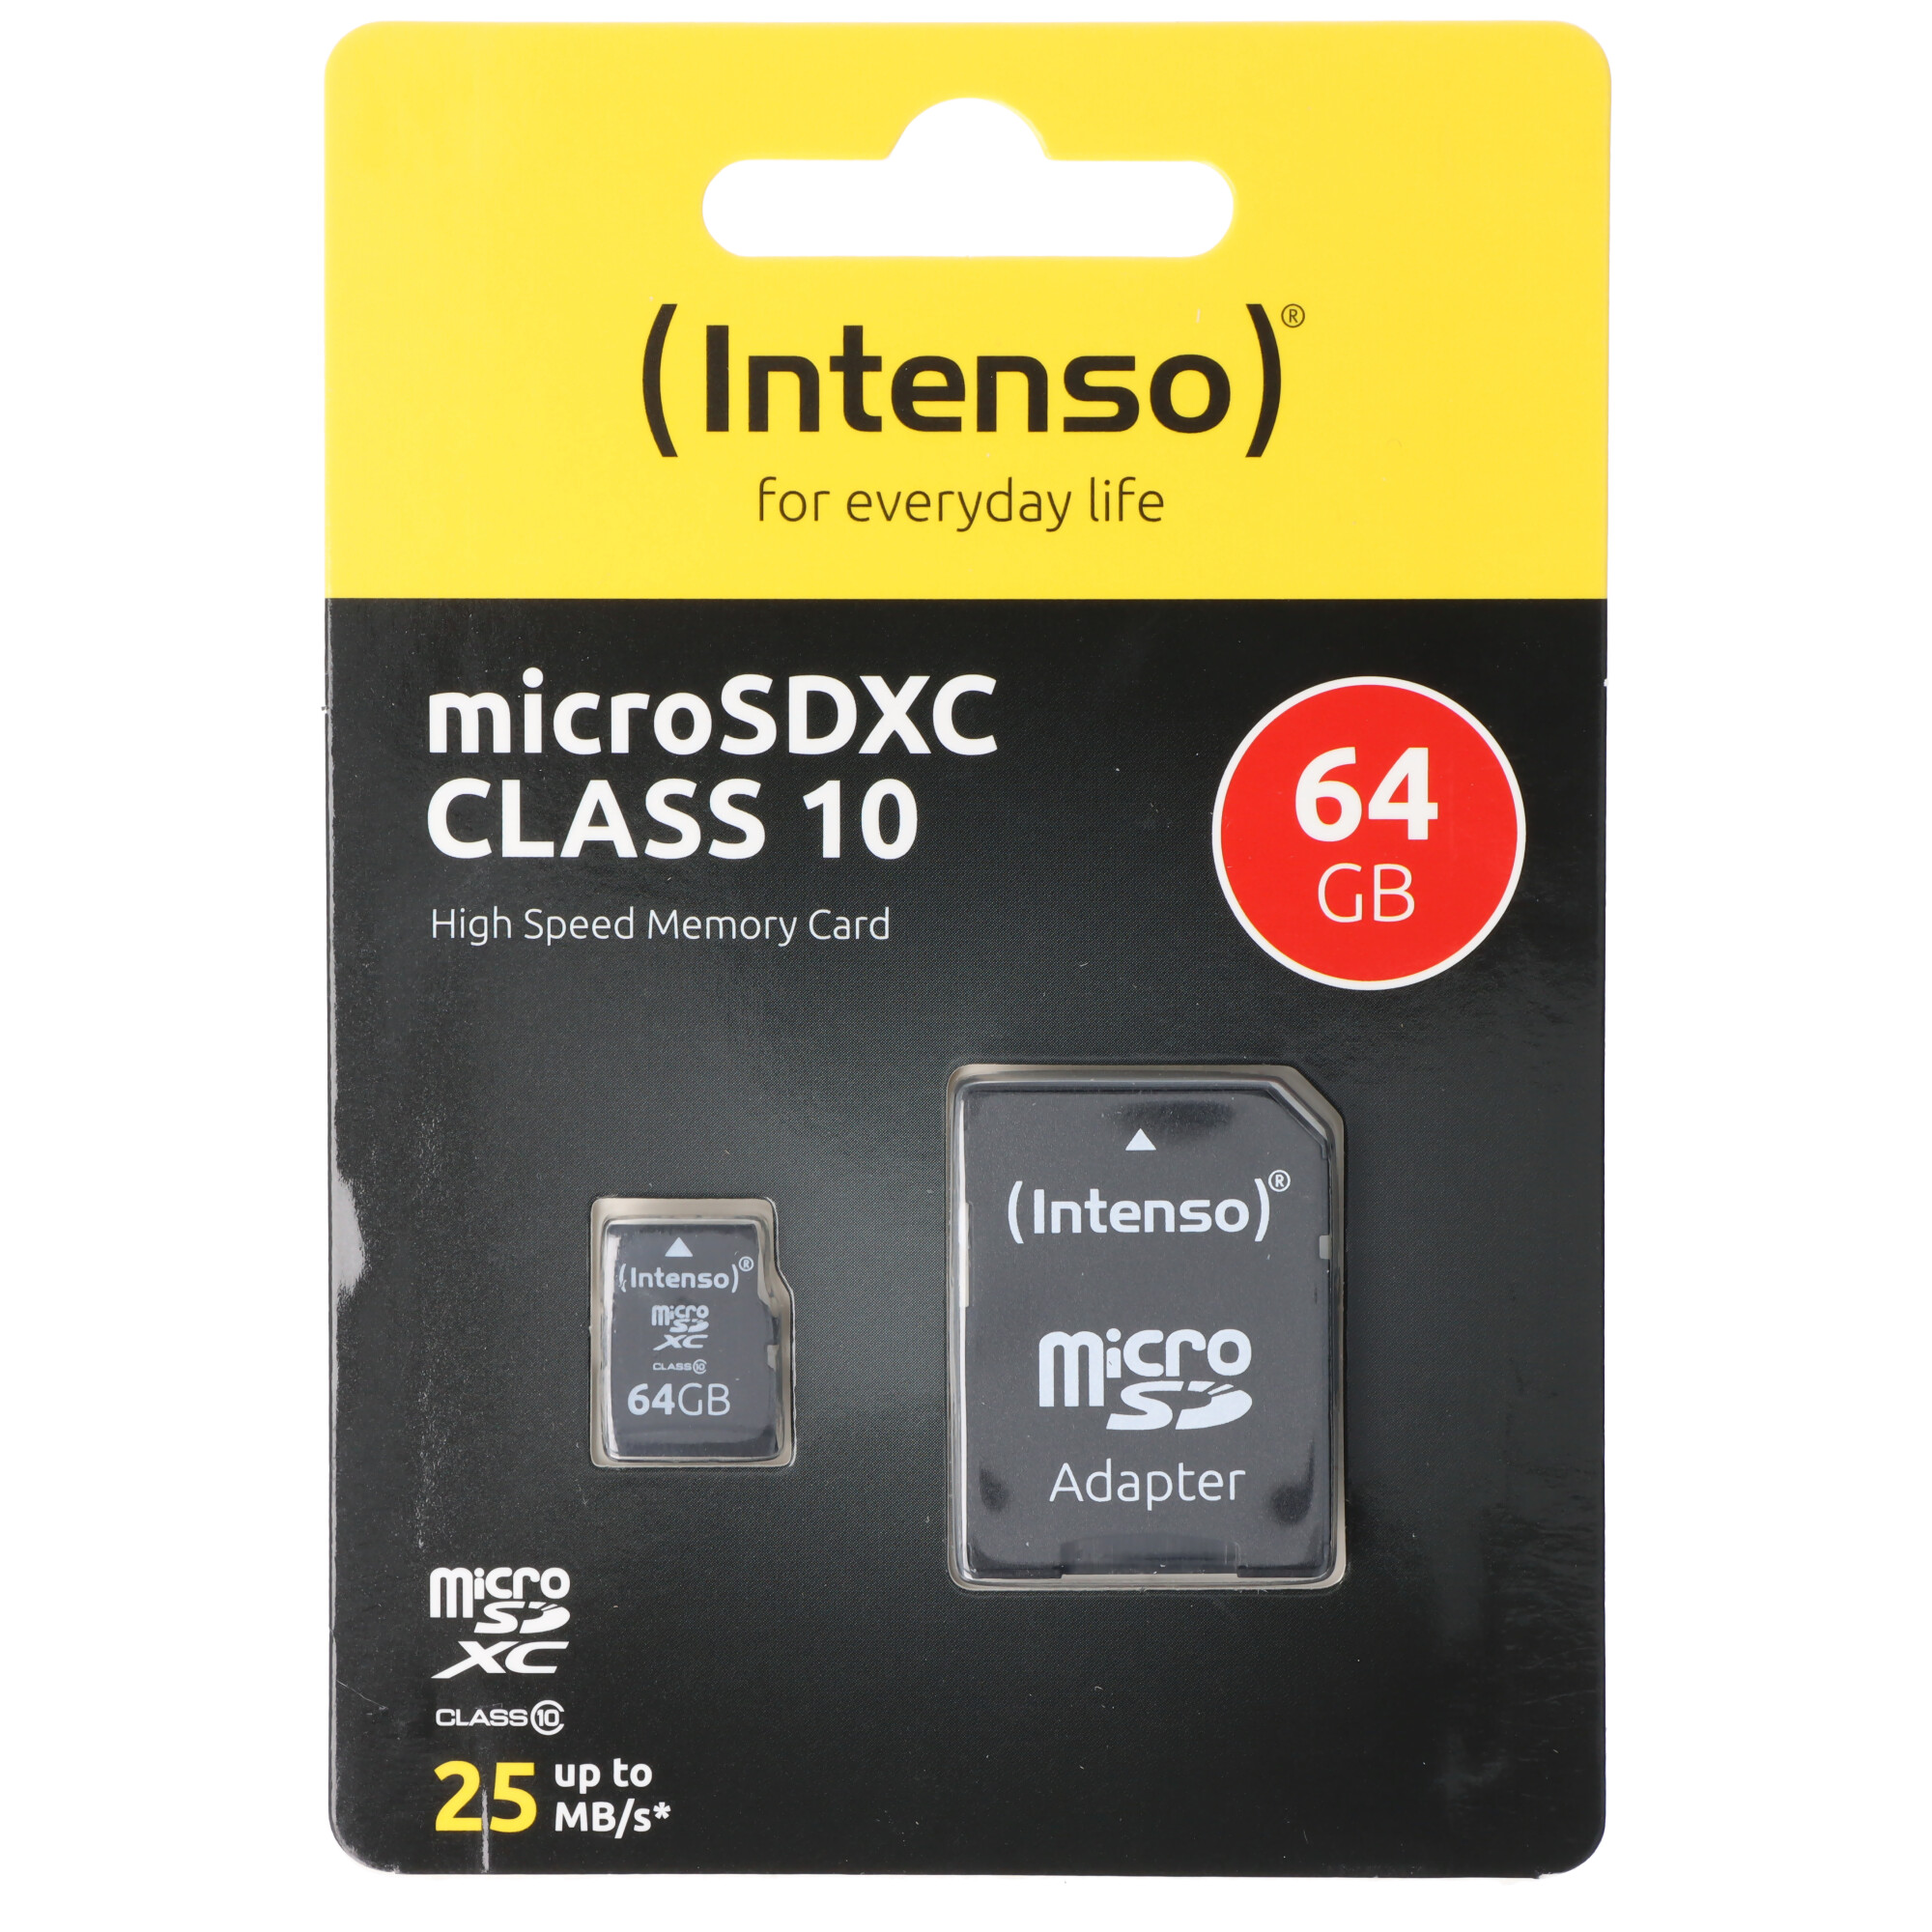 Intenso microSDXC Card 64GB, Class 10 (R) 25MB/s, (W) 10MB/s, SD-Adapter, Retail-Blister